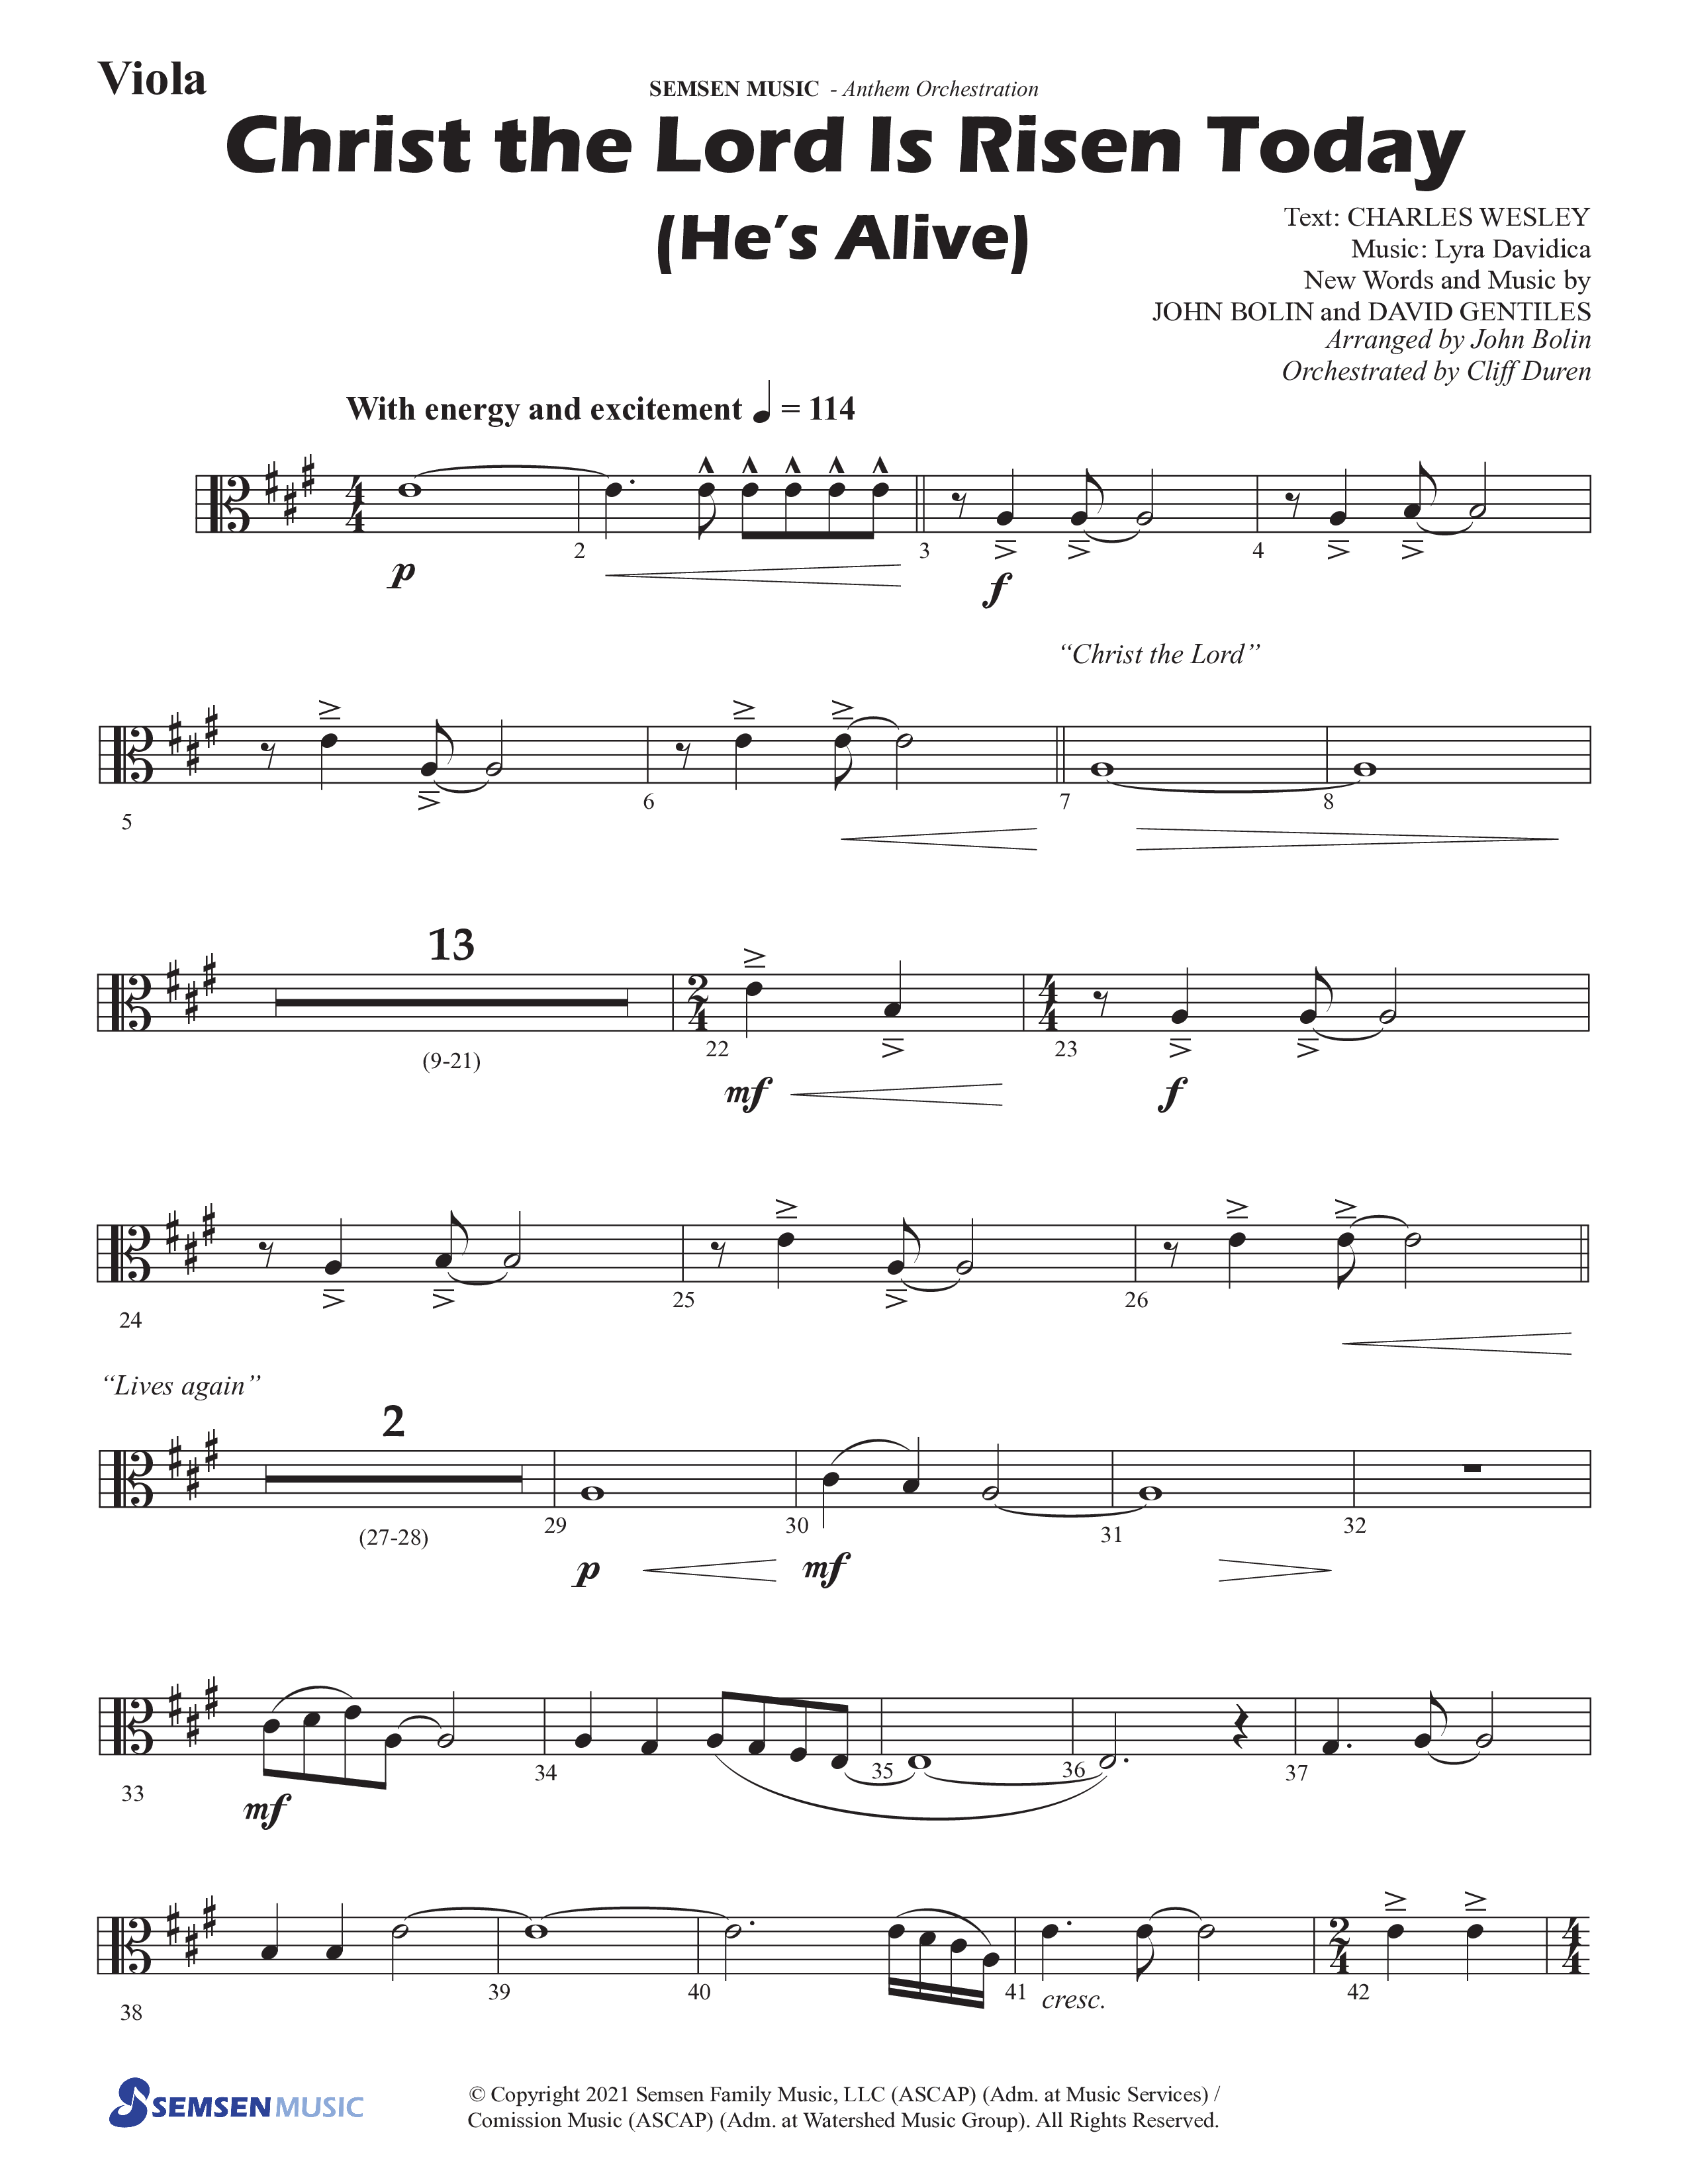 Christ The Lord Is Risen Today (He's Alive) (Choral Anthem SATB) Viola (Semsen Music / Arr. John Bolin / Orch. Cliff Duren)